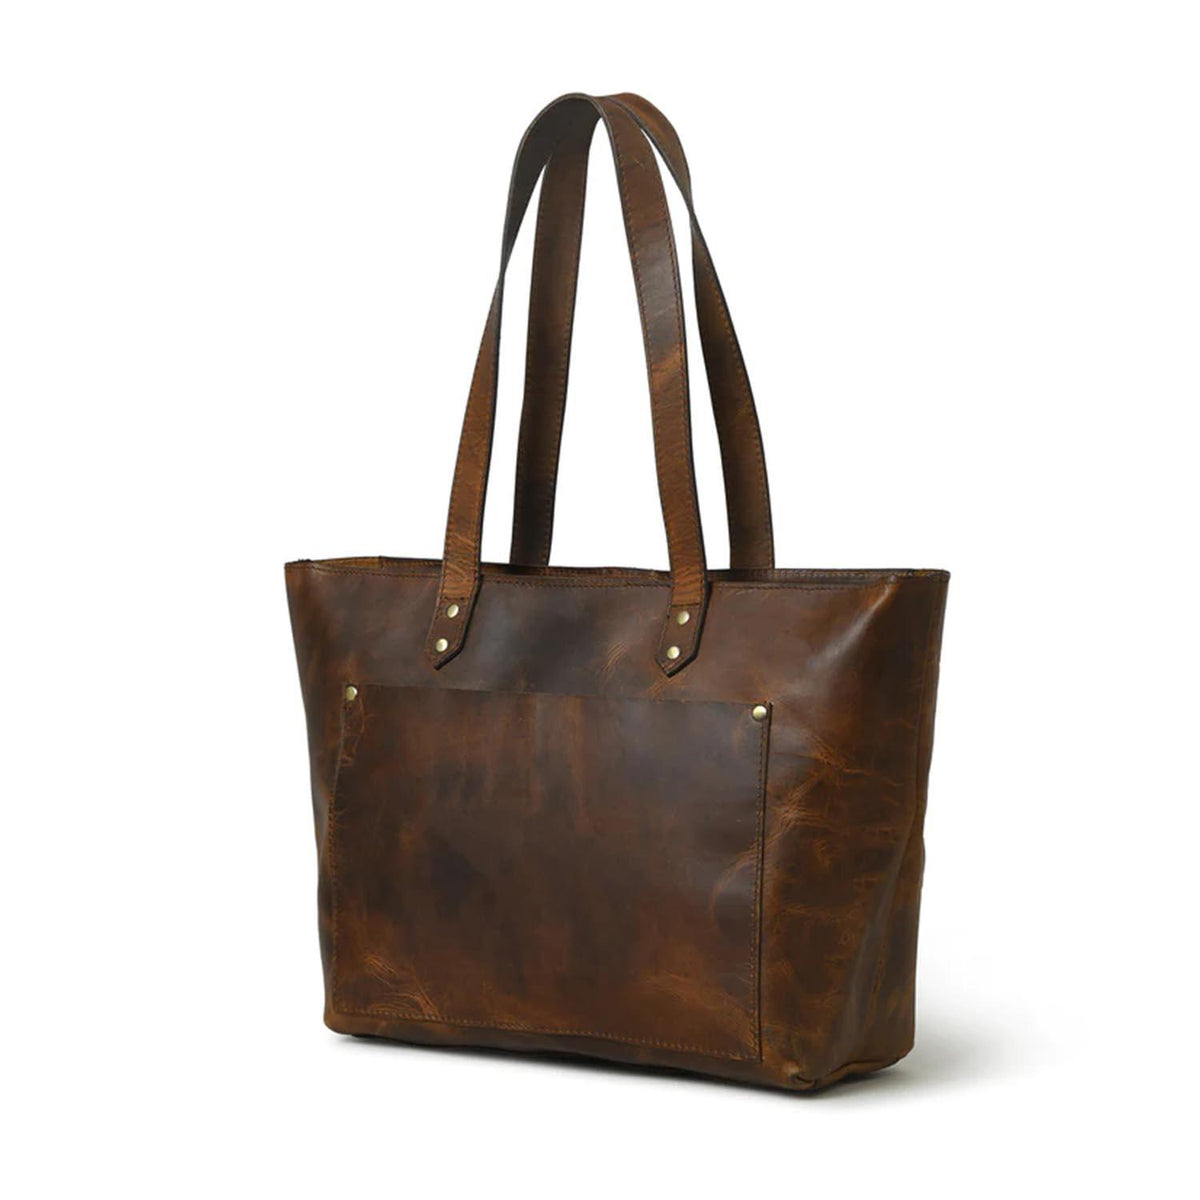 Essential Work Women's Leather Tote Brown